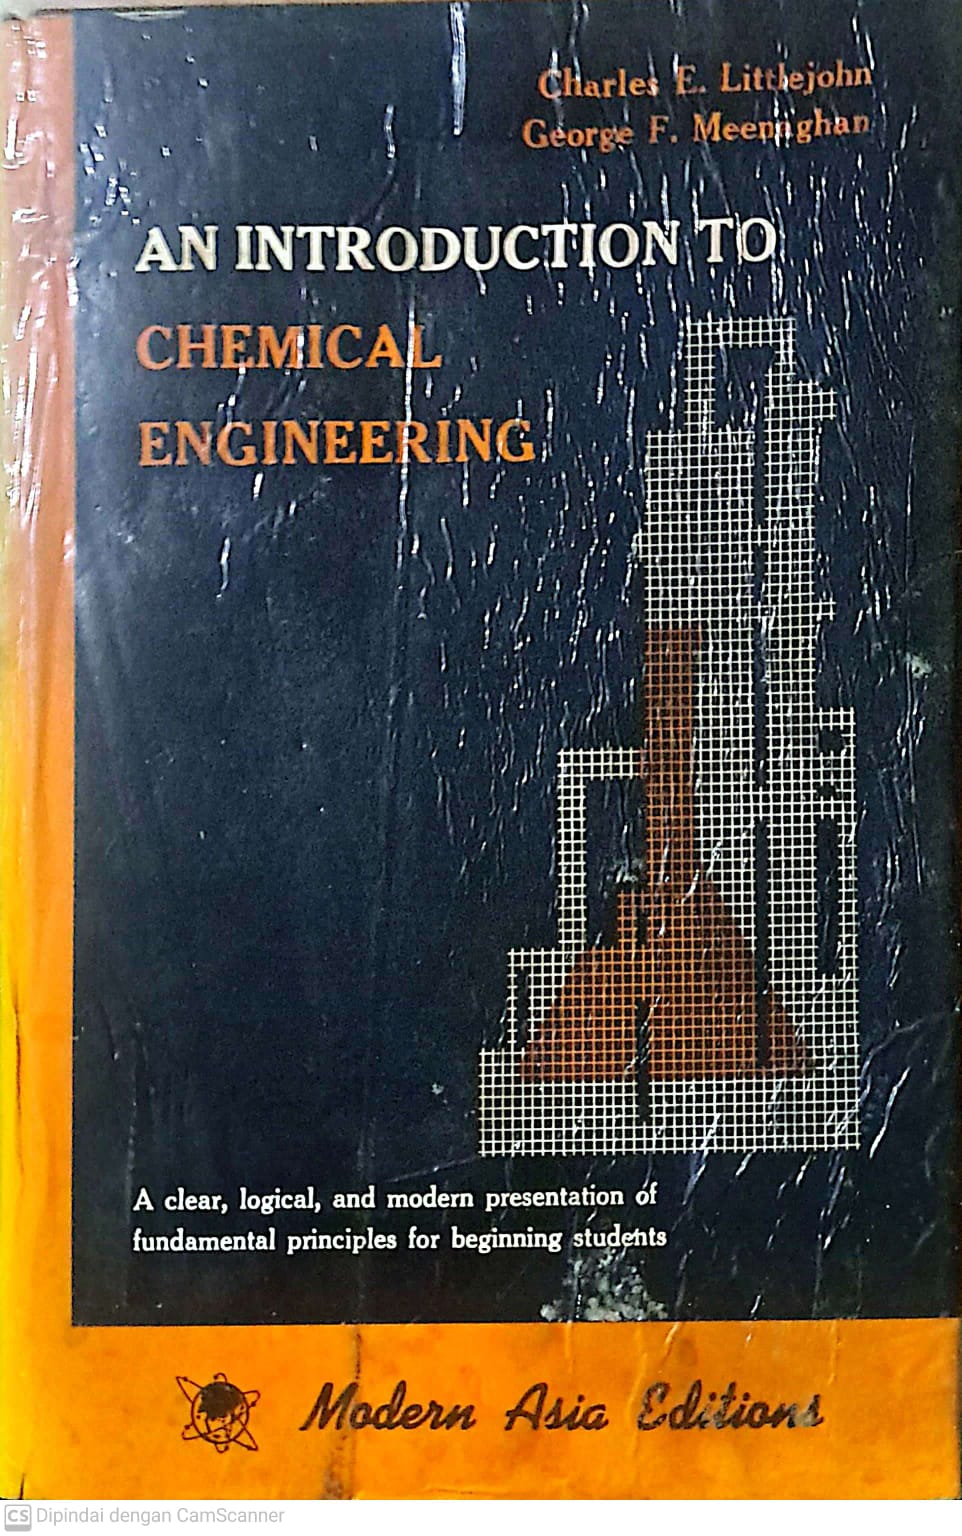 An Introduction to Chemical Engineering